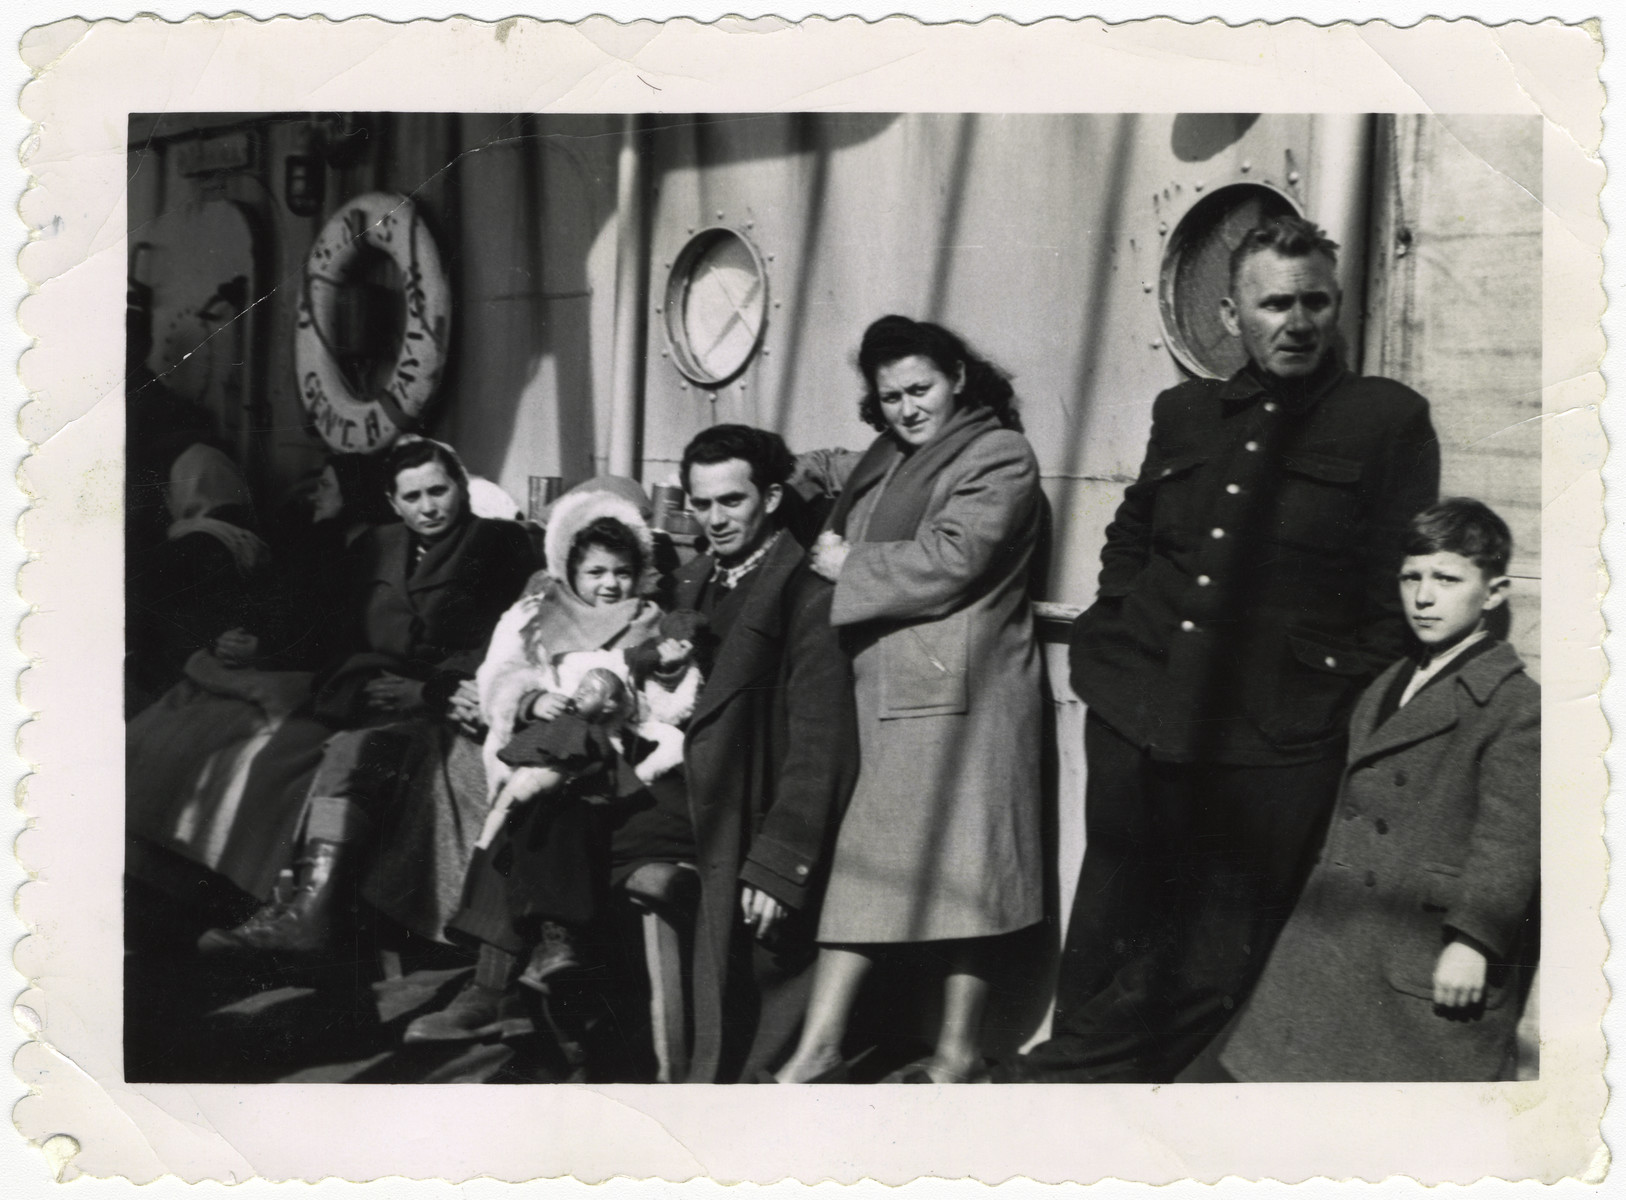 A Jewish family on board the ship "Henry Taylor," enroute to the United States.  

Pictured in the center is  Regina Zawierucha (later Zavier), holding her doll; to her left are her father, Sender, and her mother, Pola.